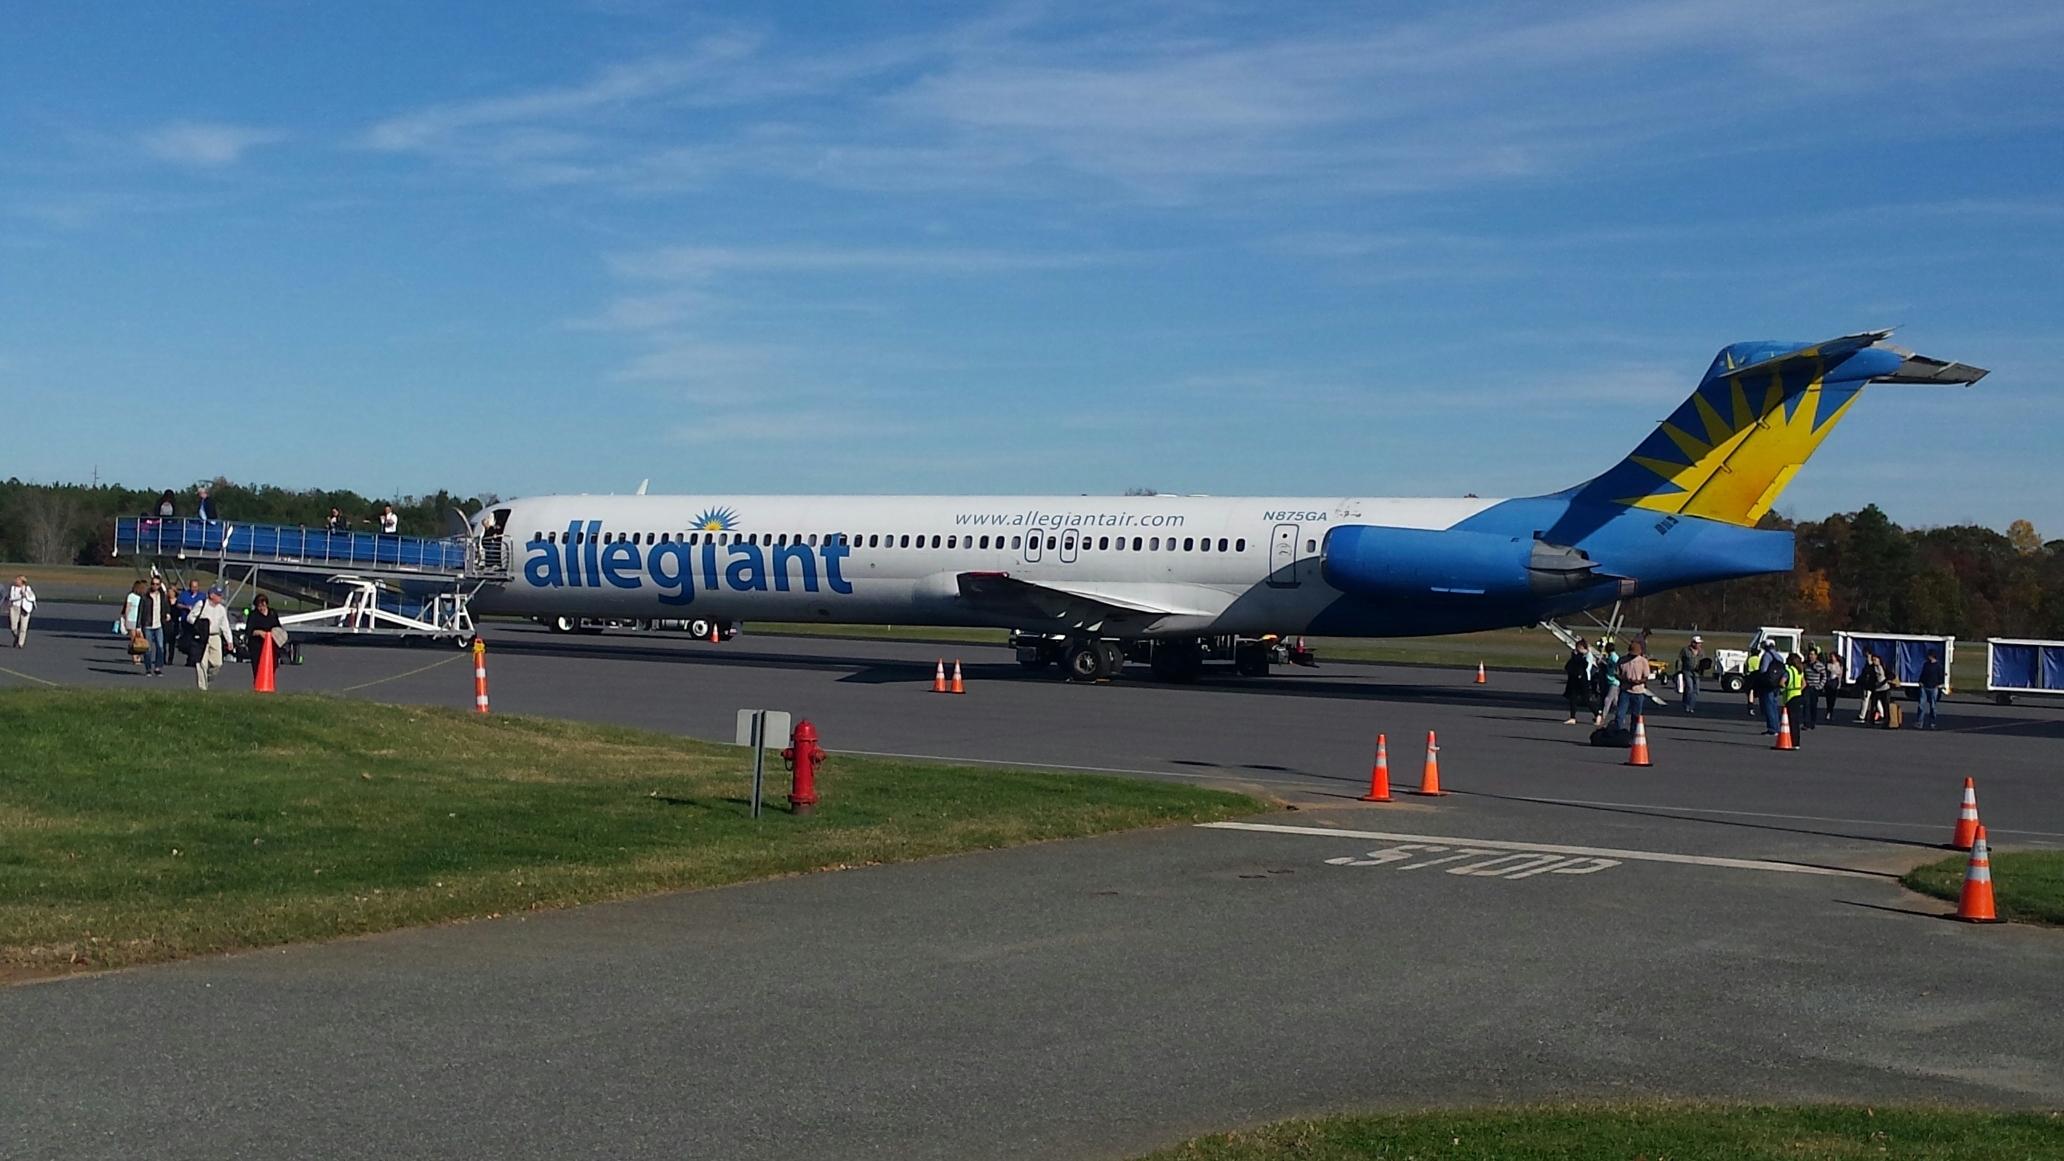 How do you view the Allegiant Airlines flight schedule?